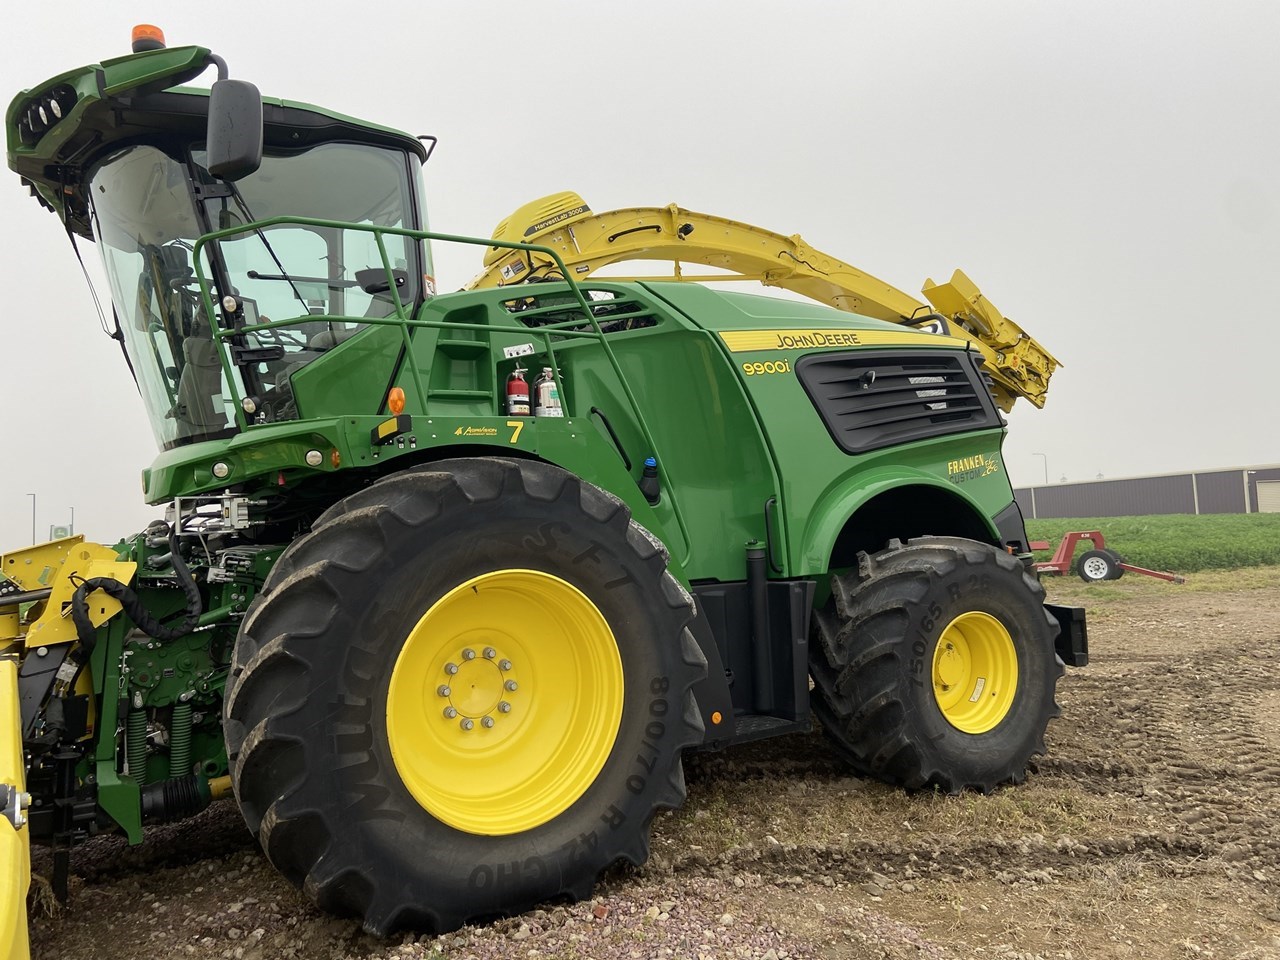 2022 John Deere 9900 Forage Harvester Self Propelled For Sale In Sioux Center Iowa 5540